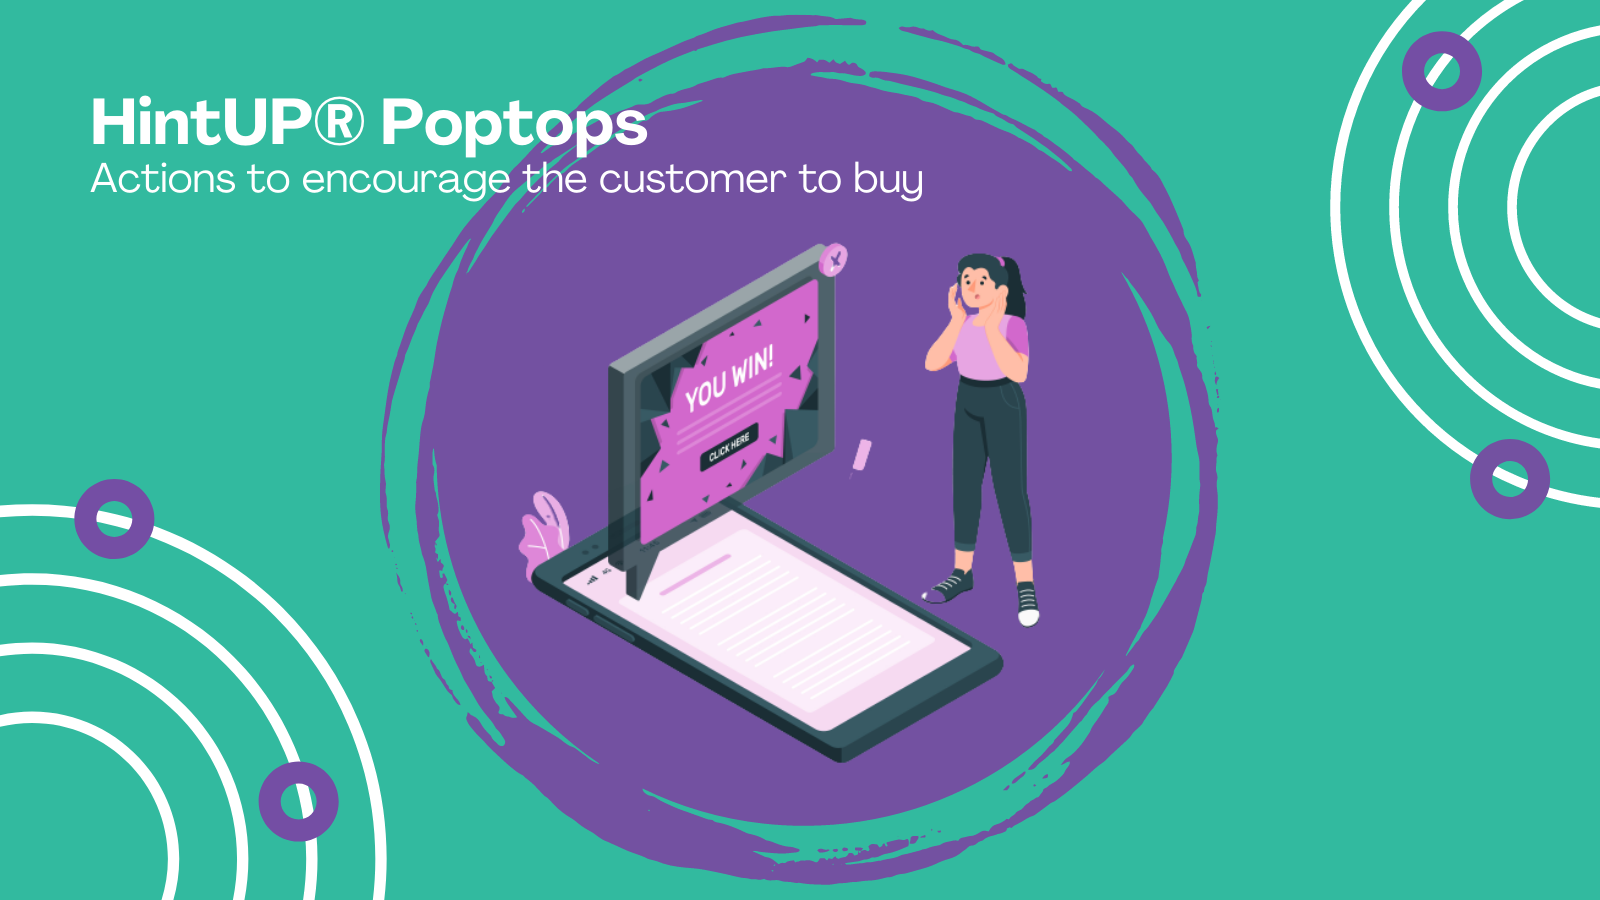 HintUP® Poptops - actions to encourage the customer to buy